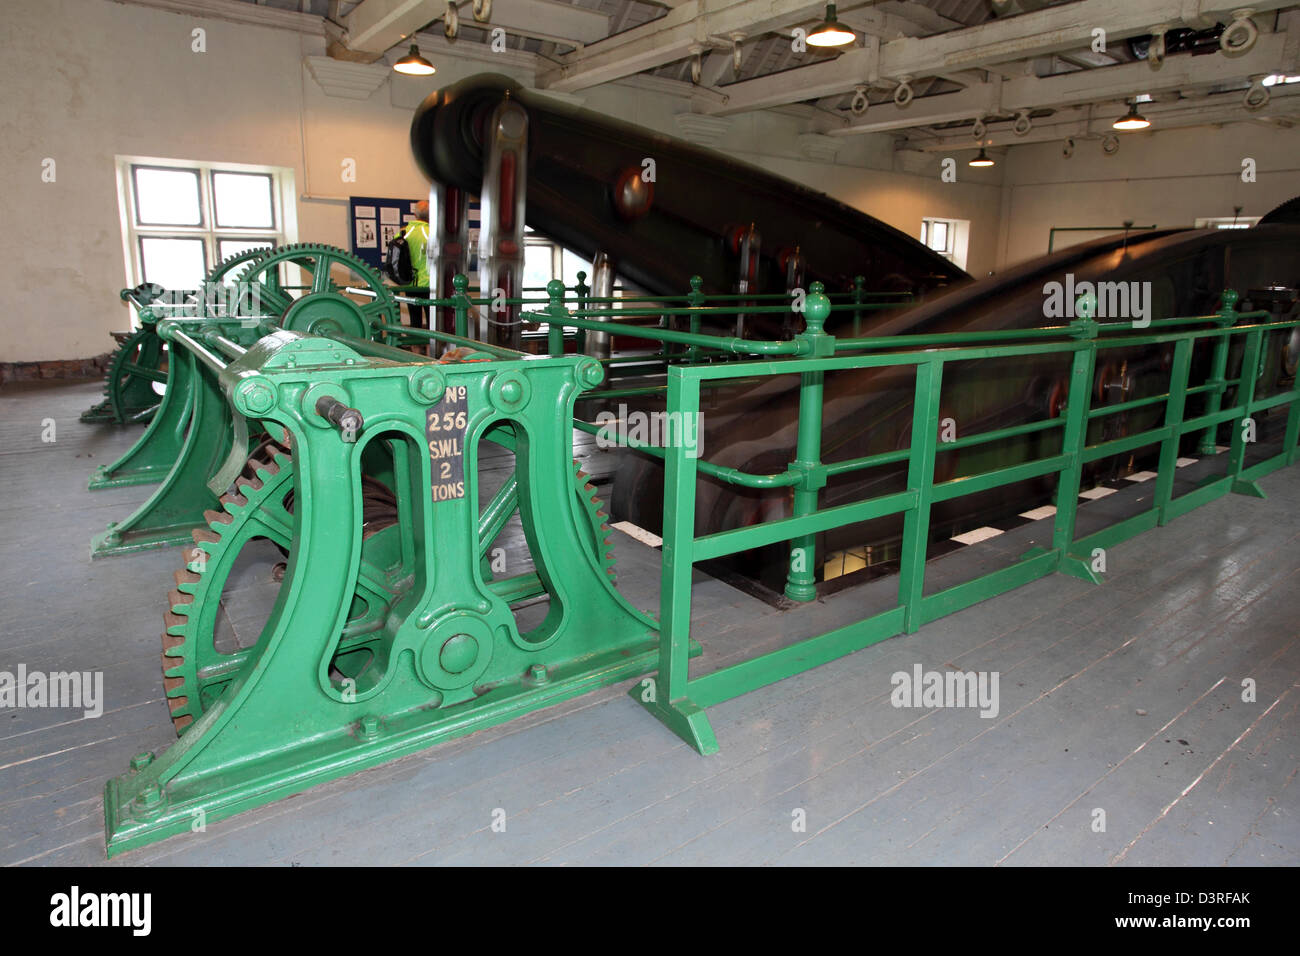 Pumps at Ryhope Pumping Station in Sunderland, England. Stock Photo